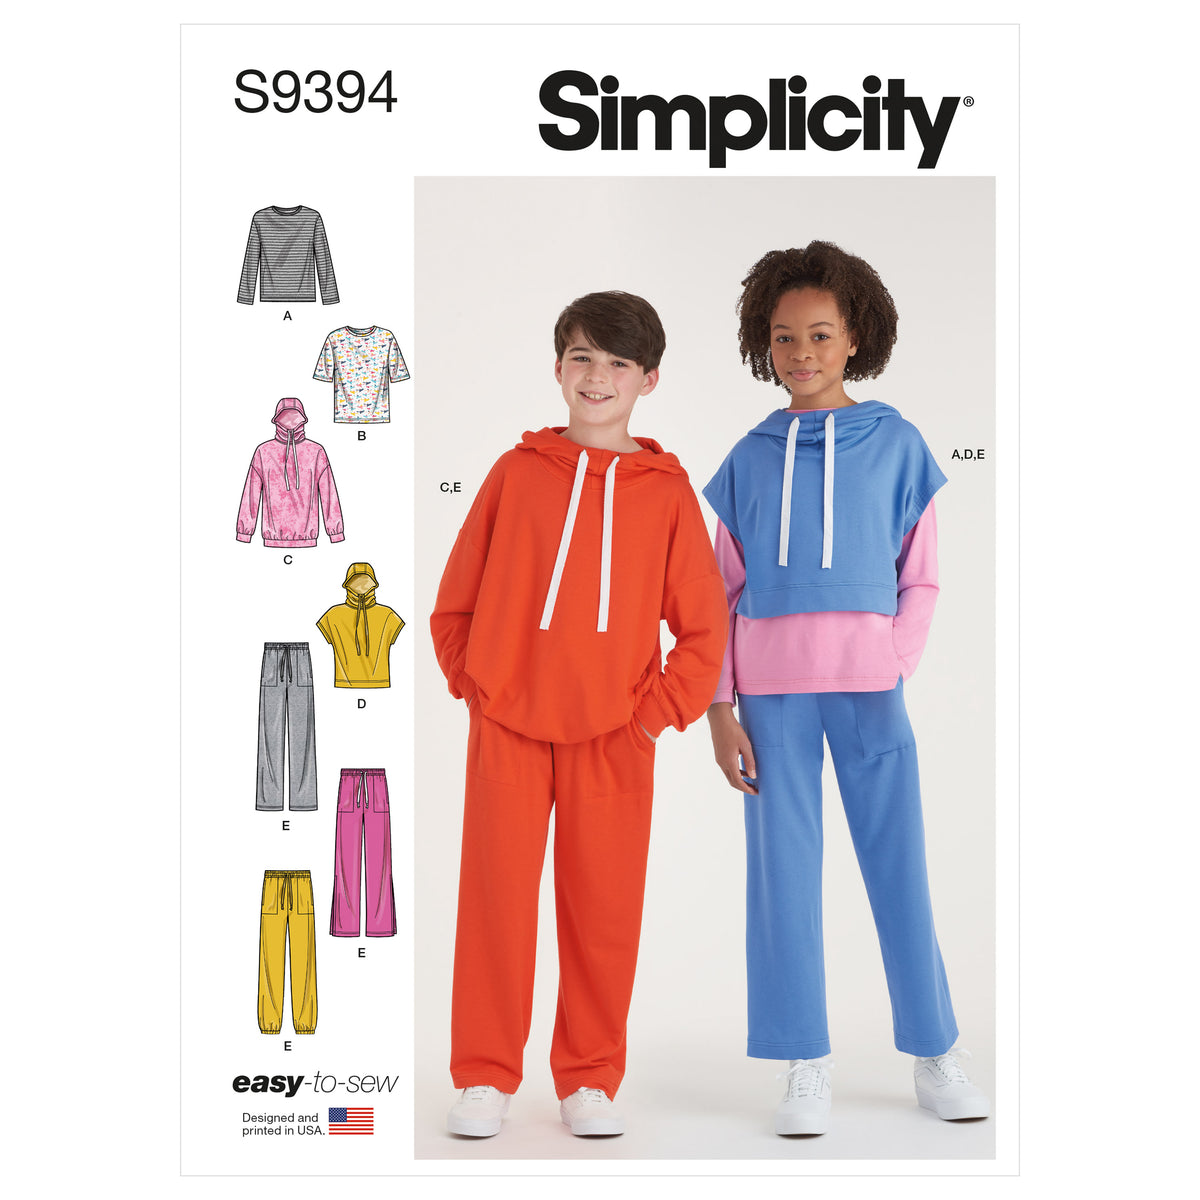 Simplicity Sewing Pattern S9394 - Boys' and Girls' Oversized Knit Hood ...